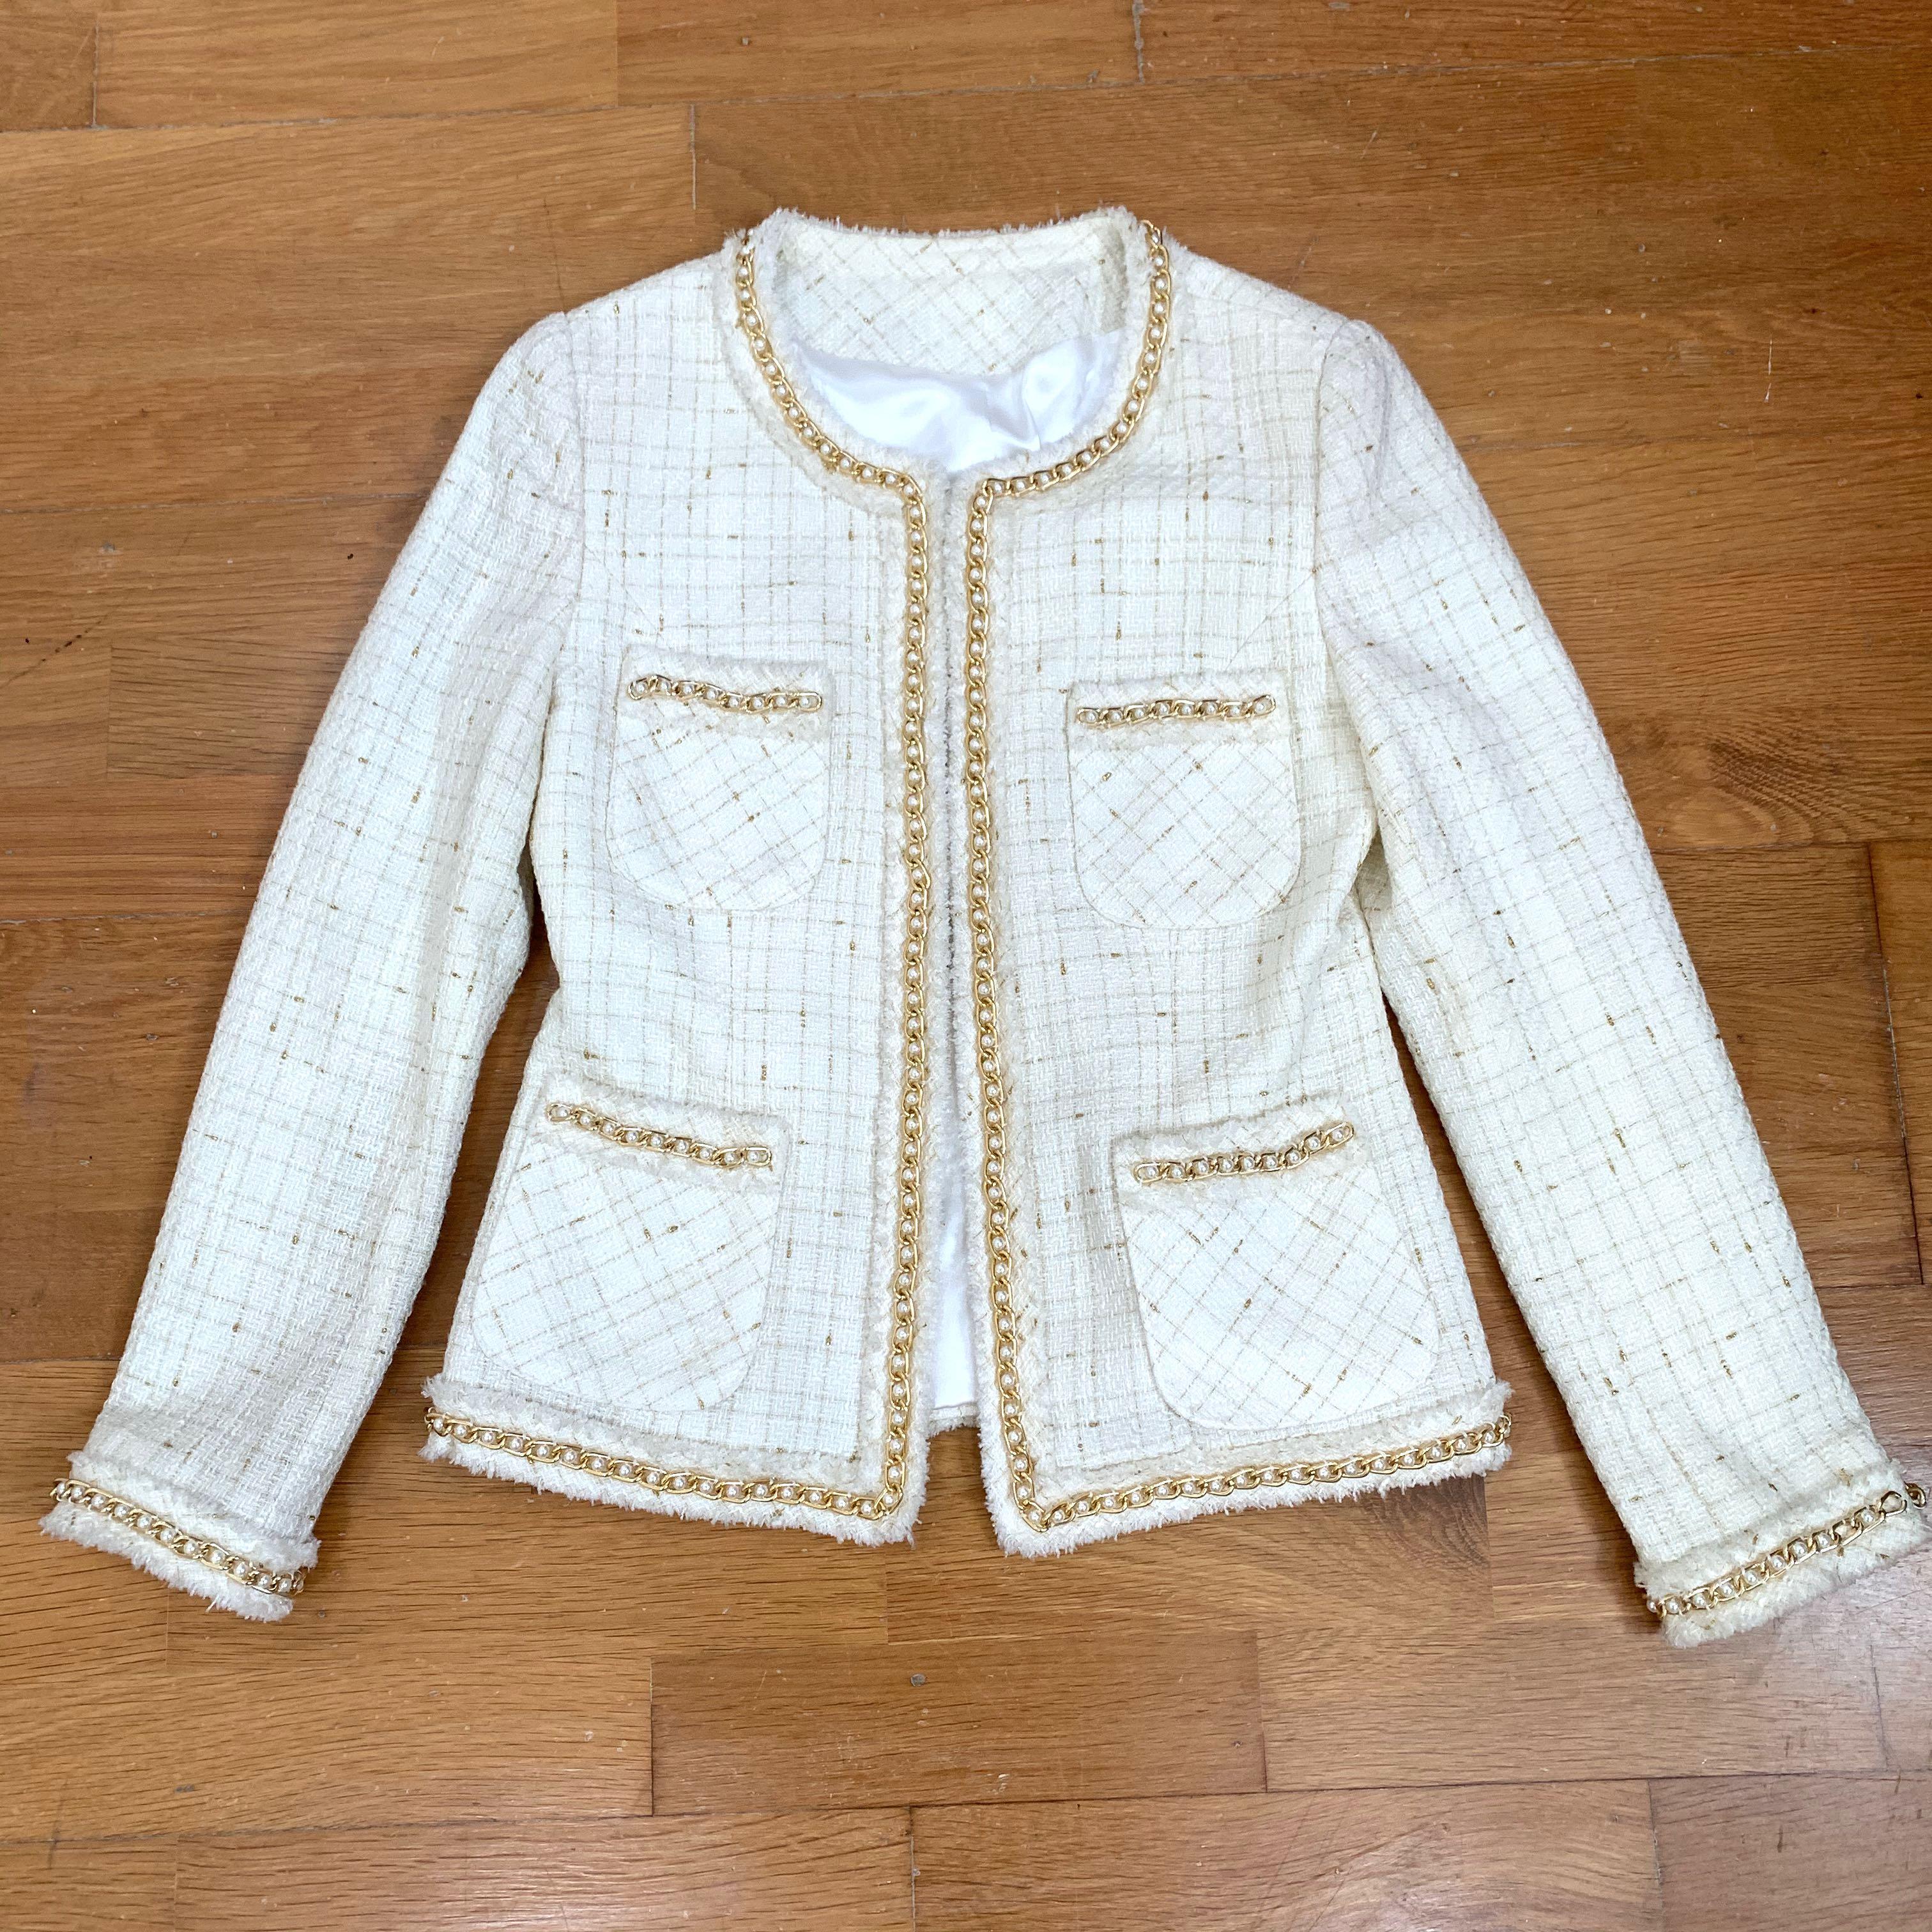 Chanel Inspired Tweed Blazer with Gold Chain & Pearl Embellishment